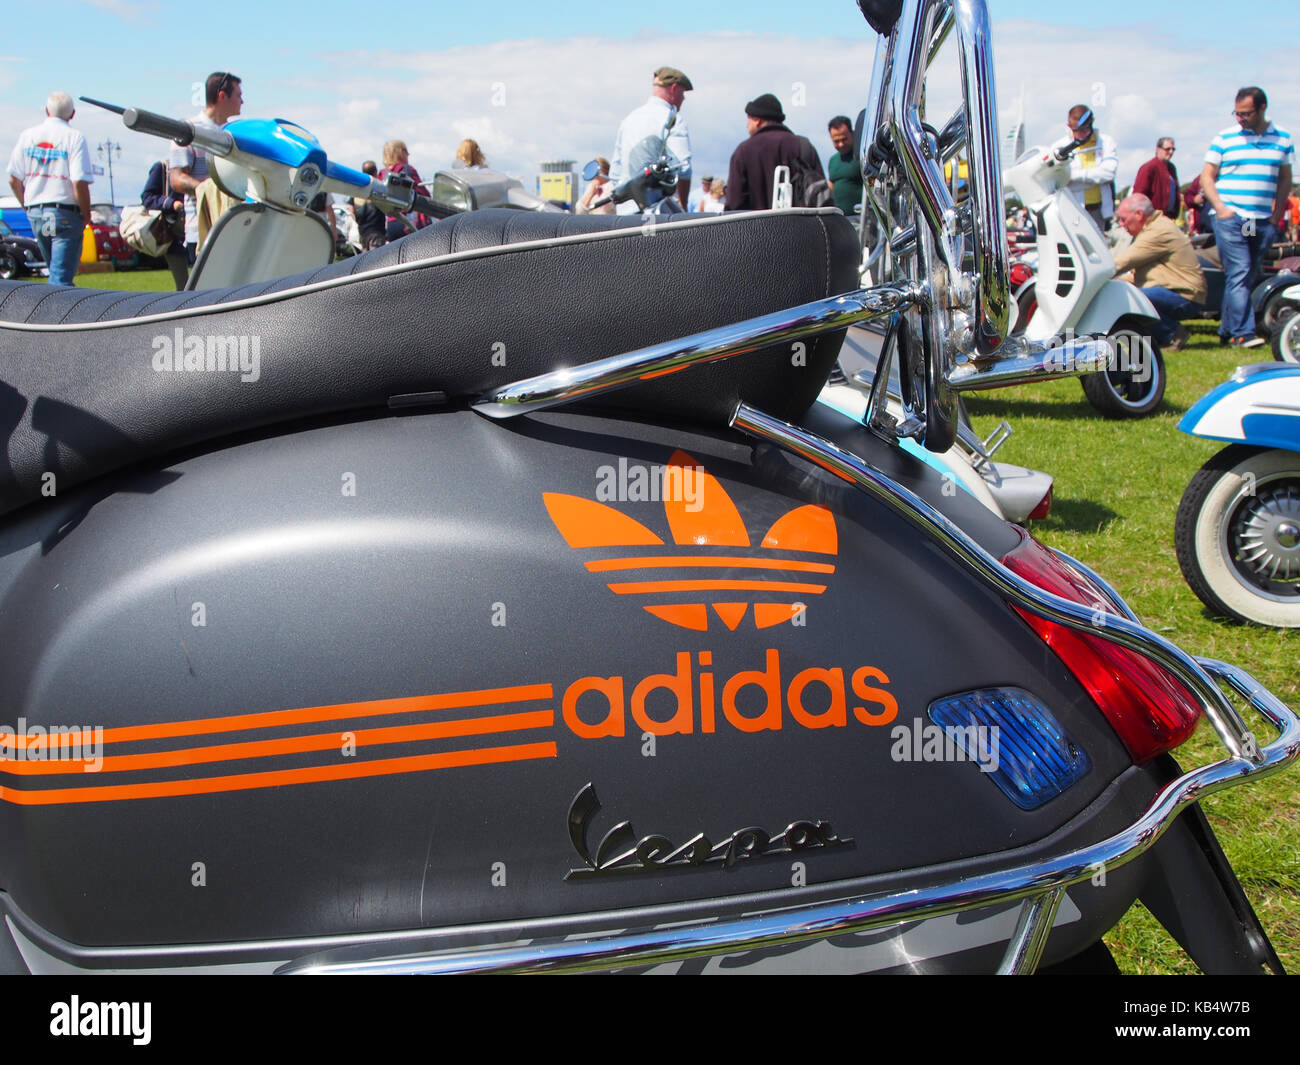 A scooter decorated on Adidas branding Stock Photo - Alamy